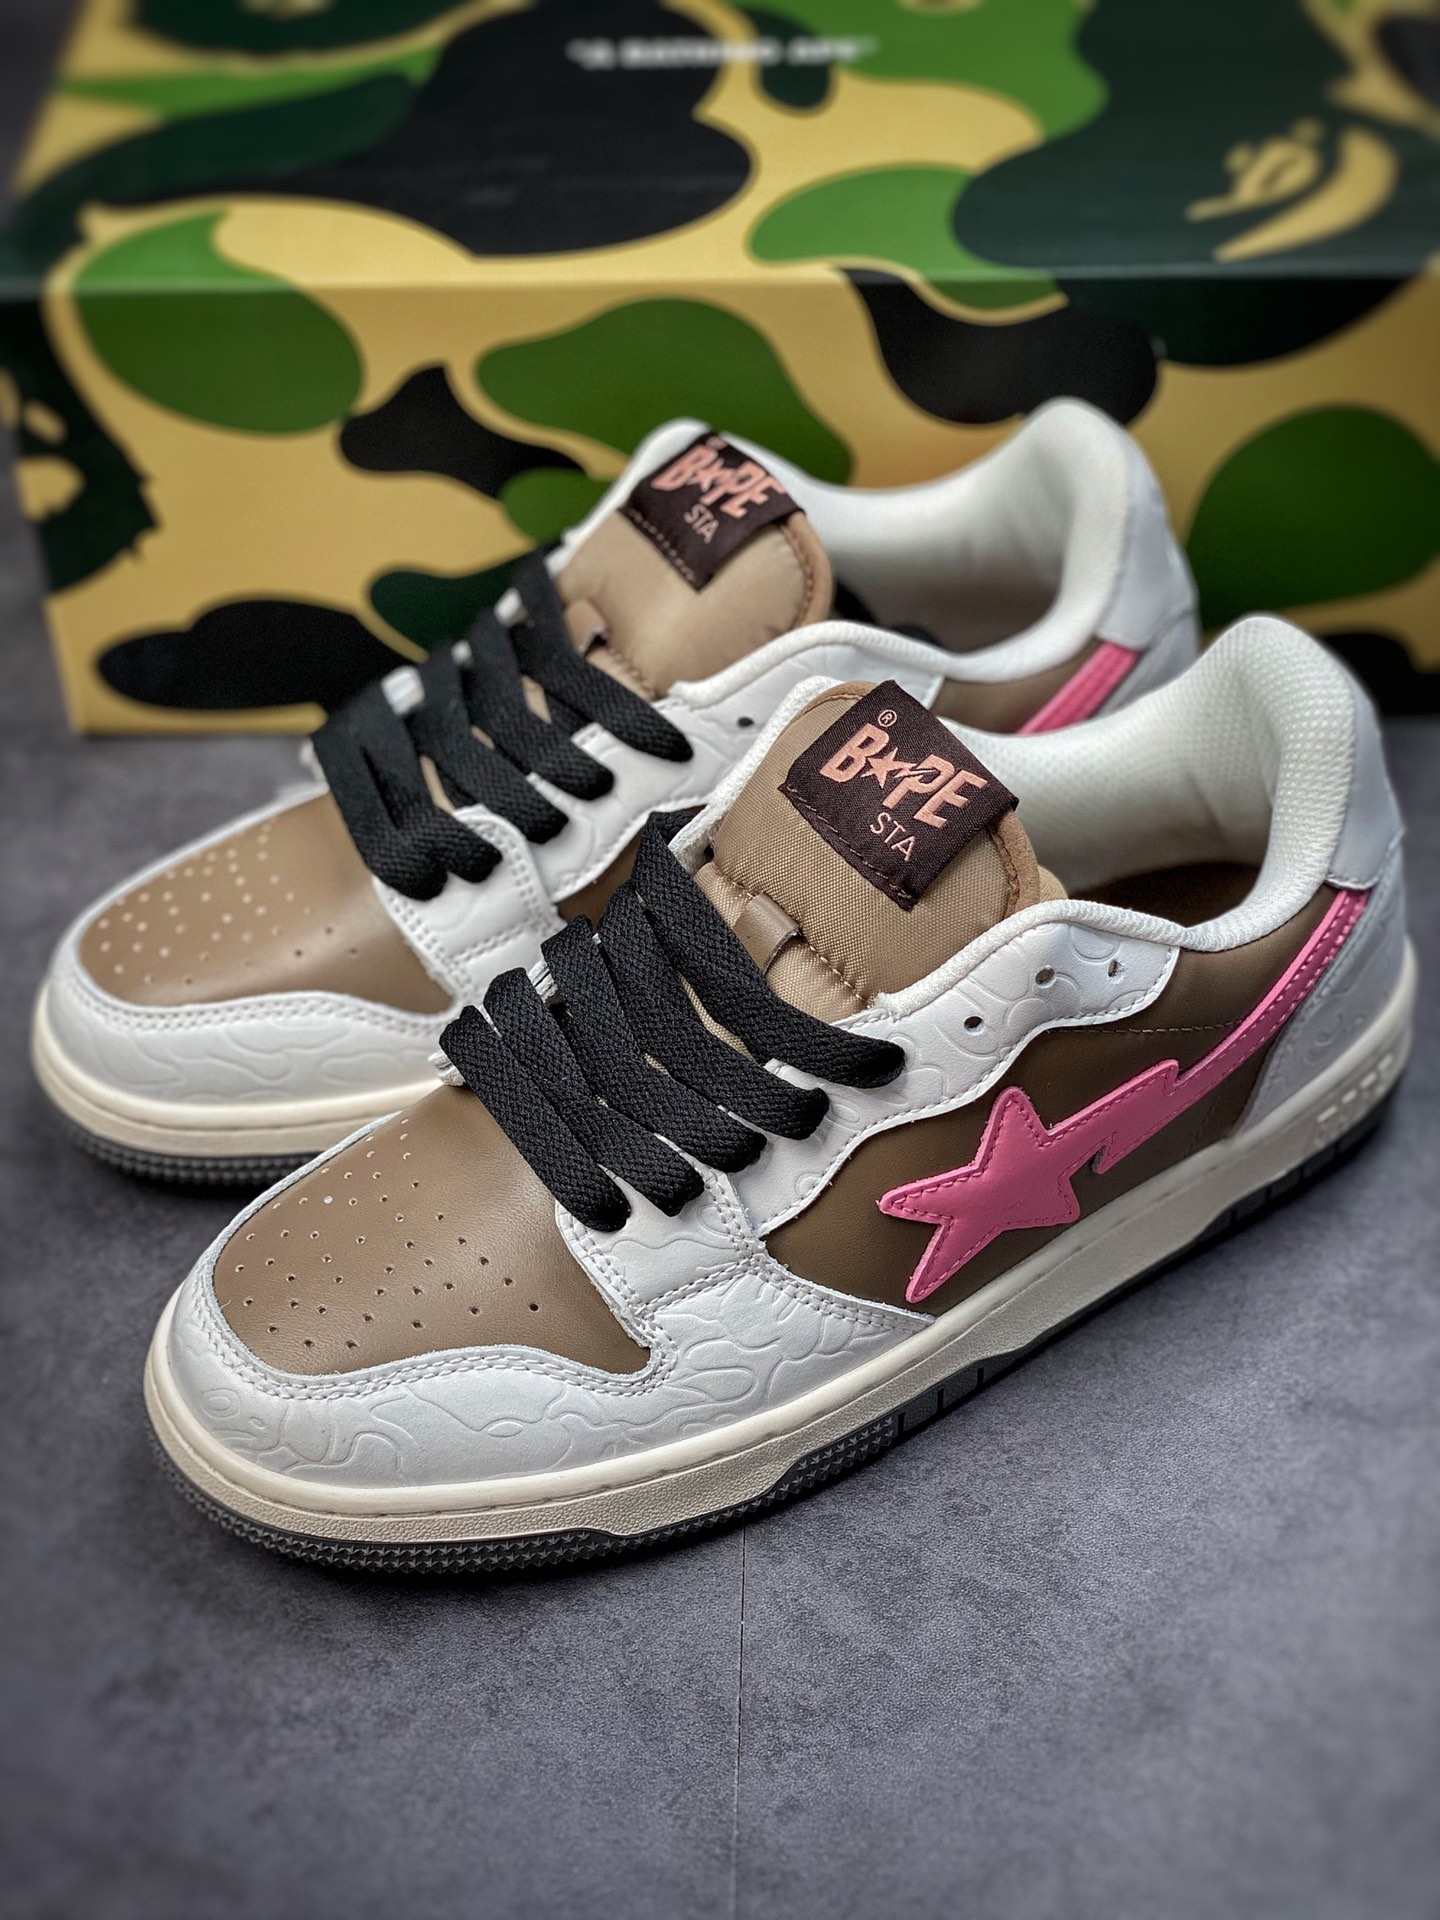 A Bathing Ape BAPE Sk8 Sta series low-top casual sports skateboard shoes